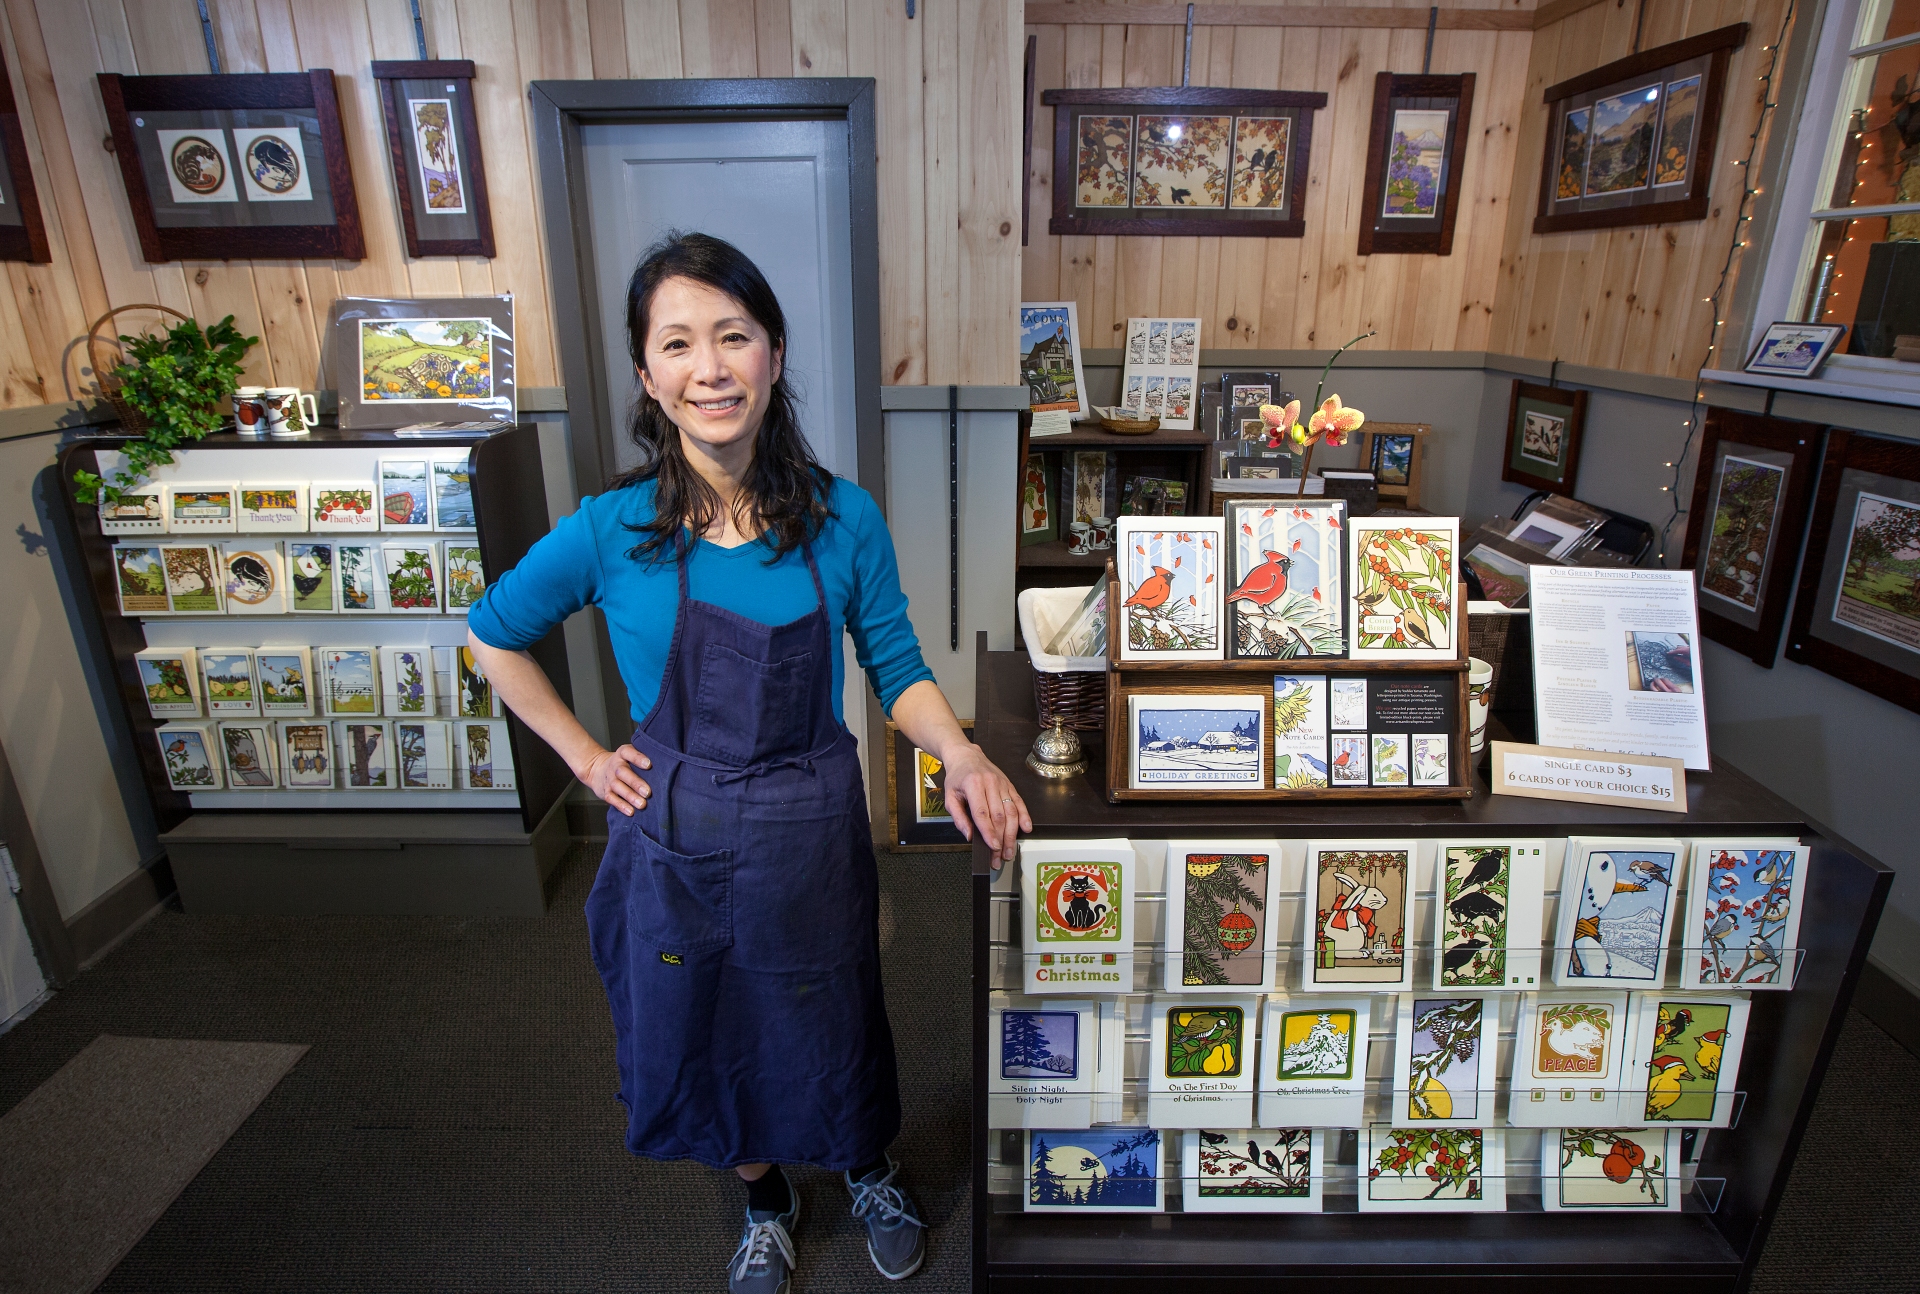 Tacoma print maker Yoshiko Yamamoto improved her small business practices with Spaceworks Creative Enterprise Tier III program. The Arts & Crafts Press produces whimsical notecards and fine art prints combining Japanese woodblock style with Western letterpress techniques.